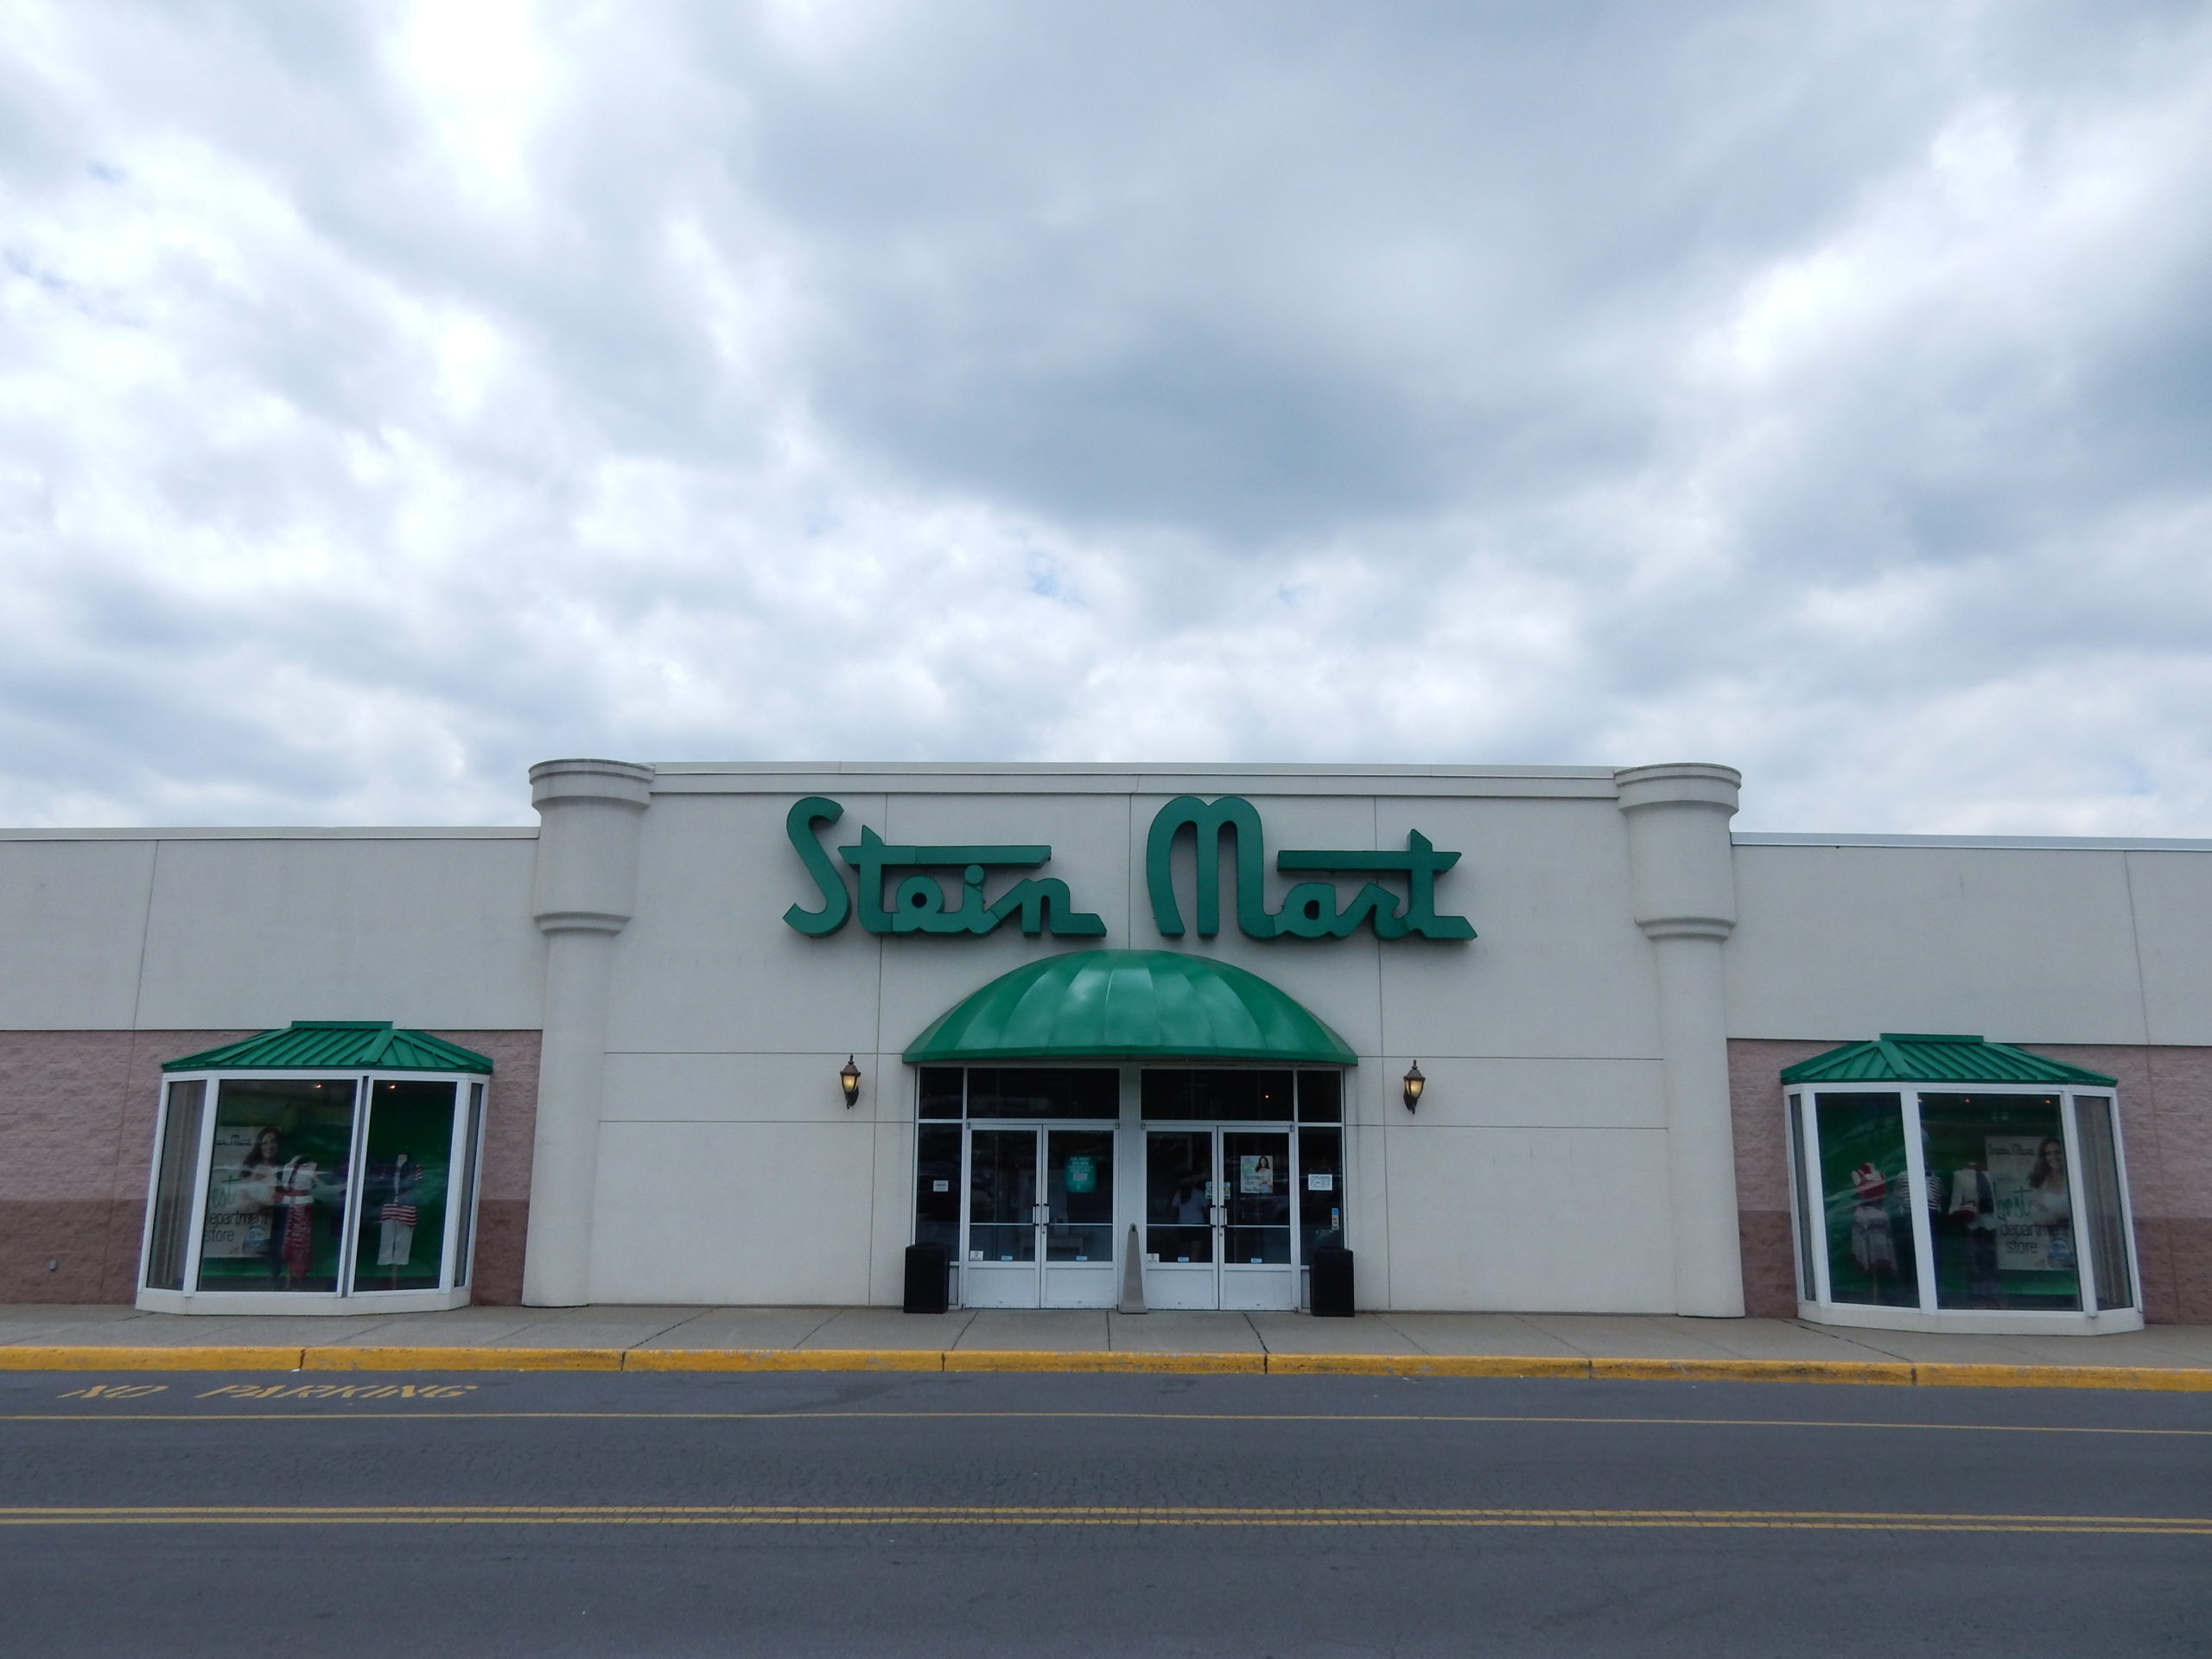 Hanover Center losing another large tenant as Stein Mart closes